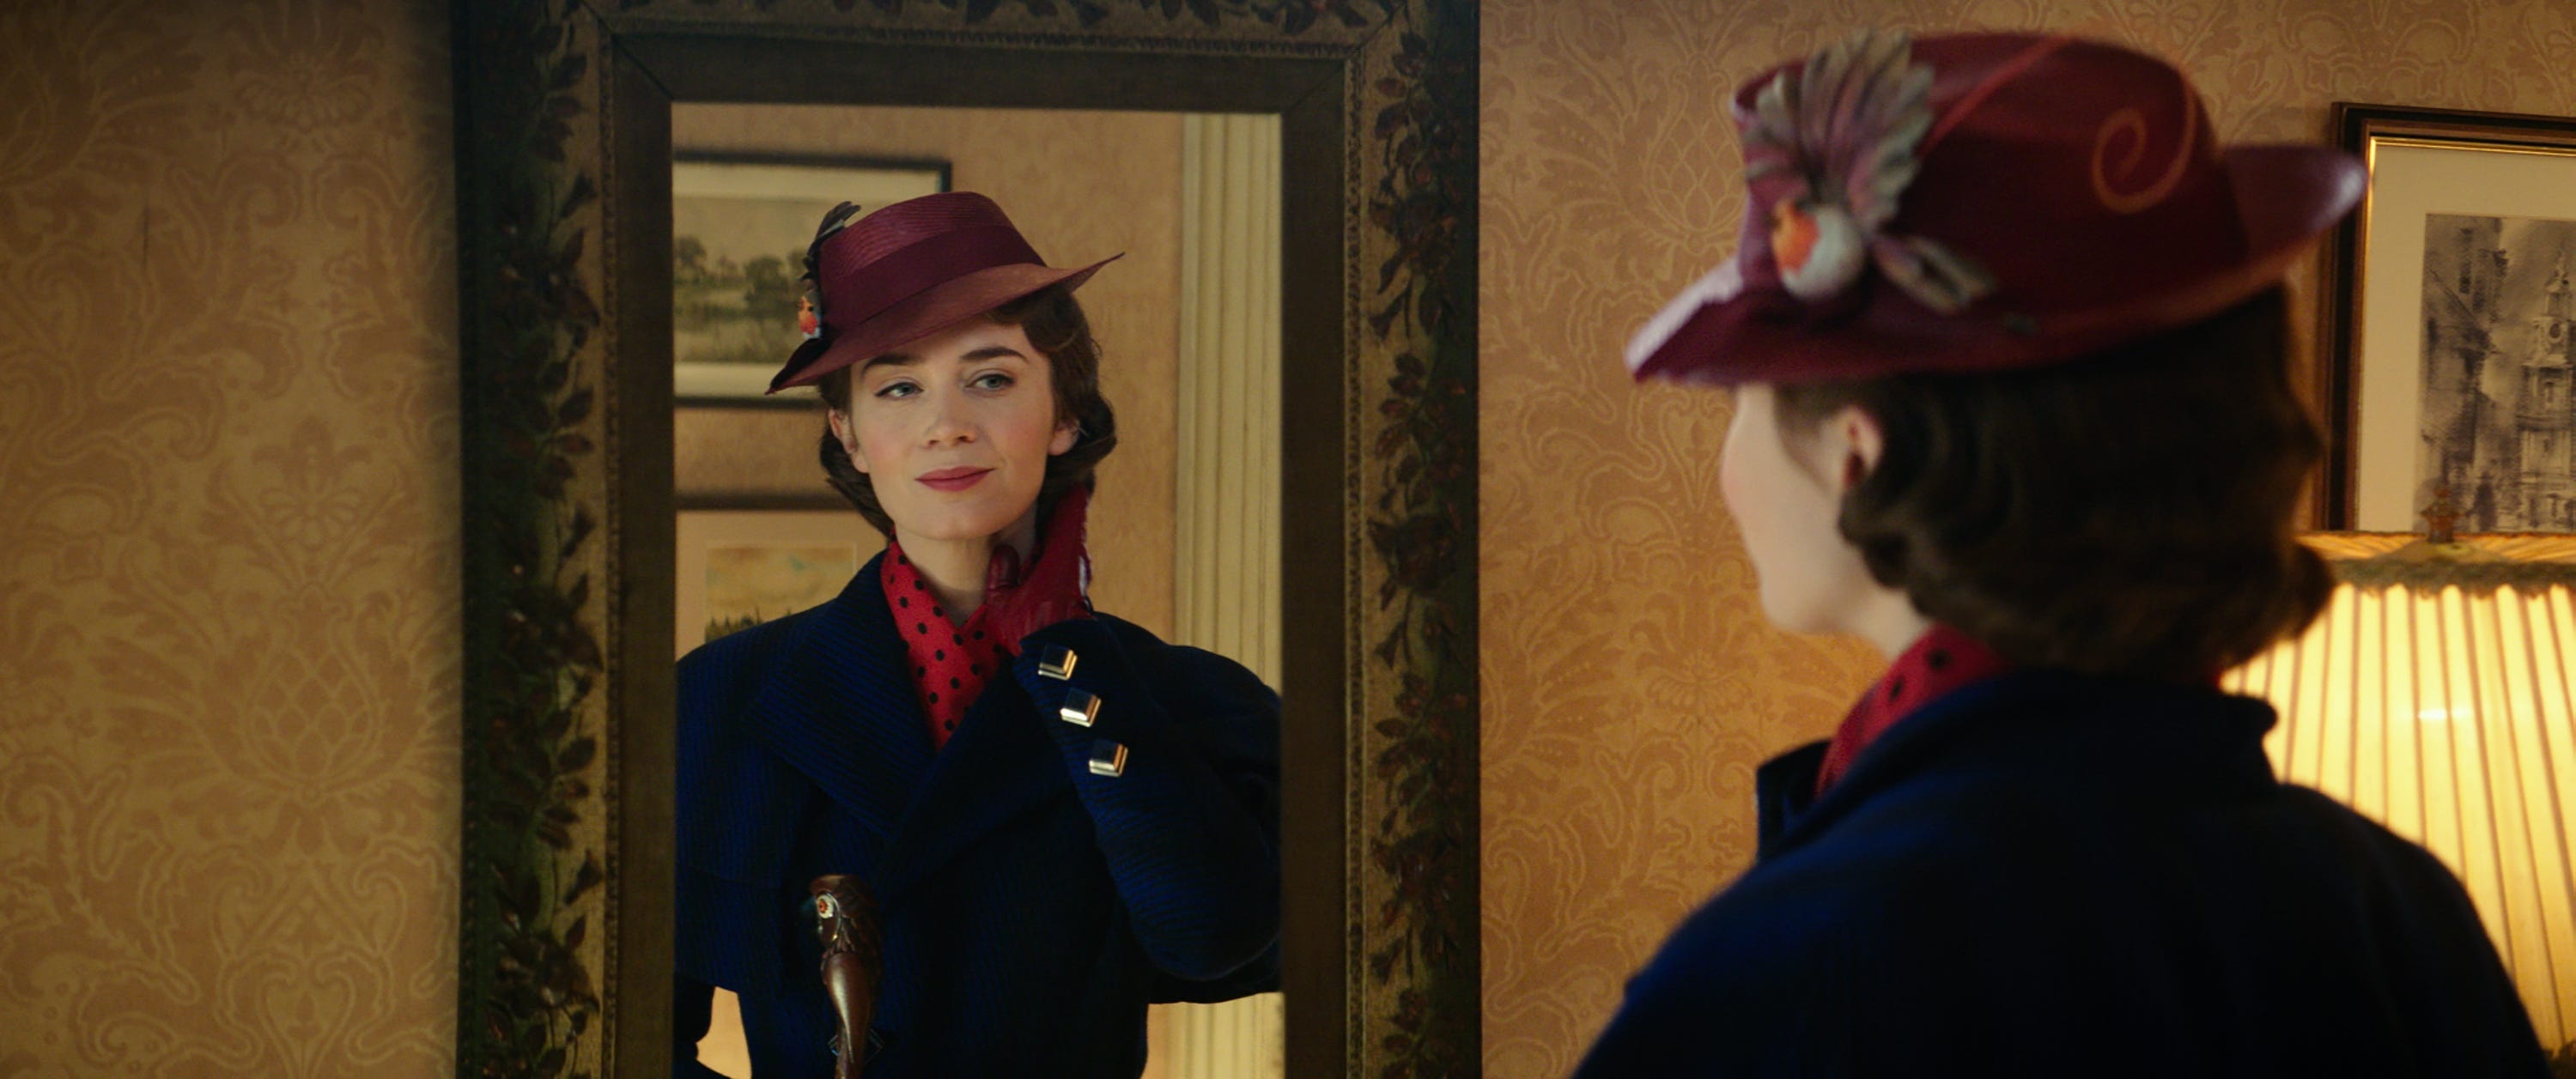 Mary Poppins Returns, Uncertain movie history, Flying away, Magical, 3000x1260 Dual Screen Desktop